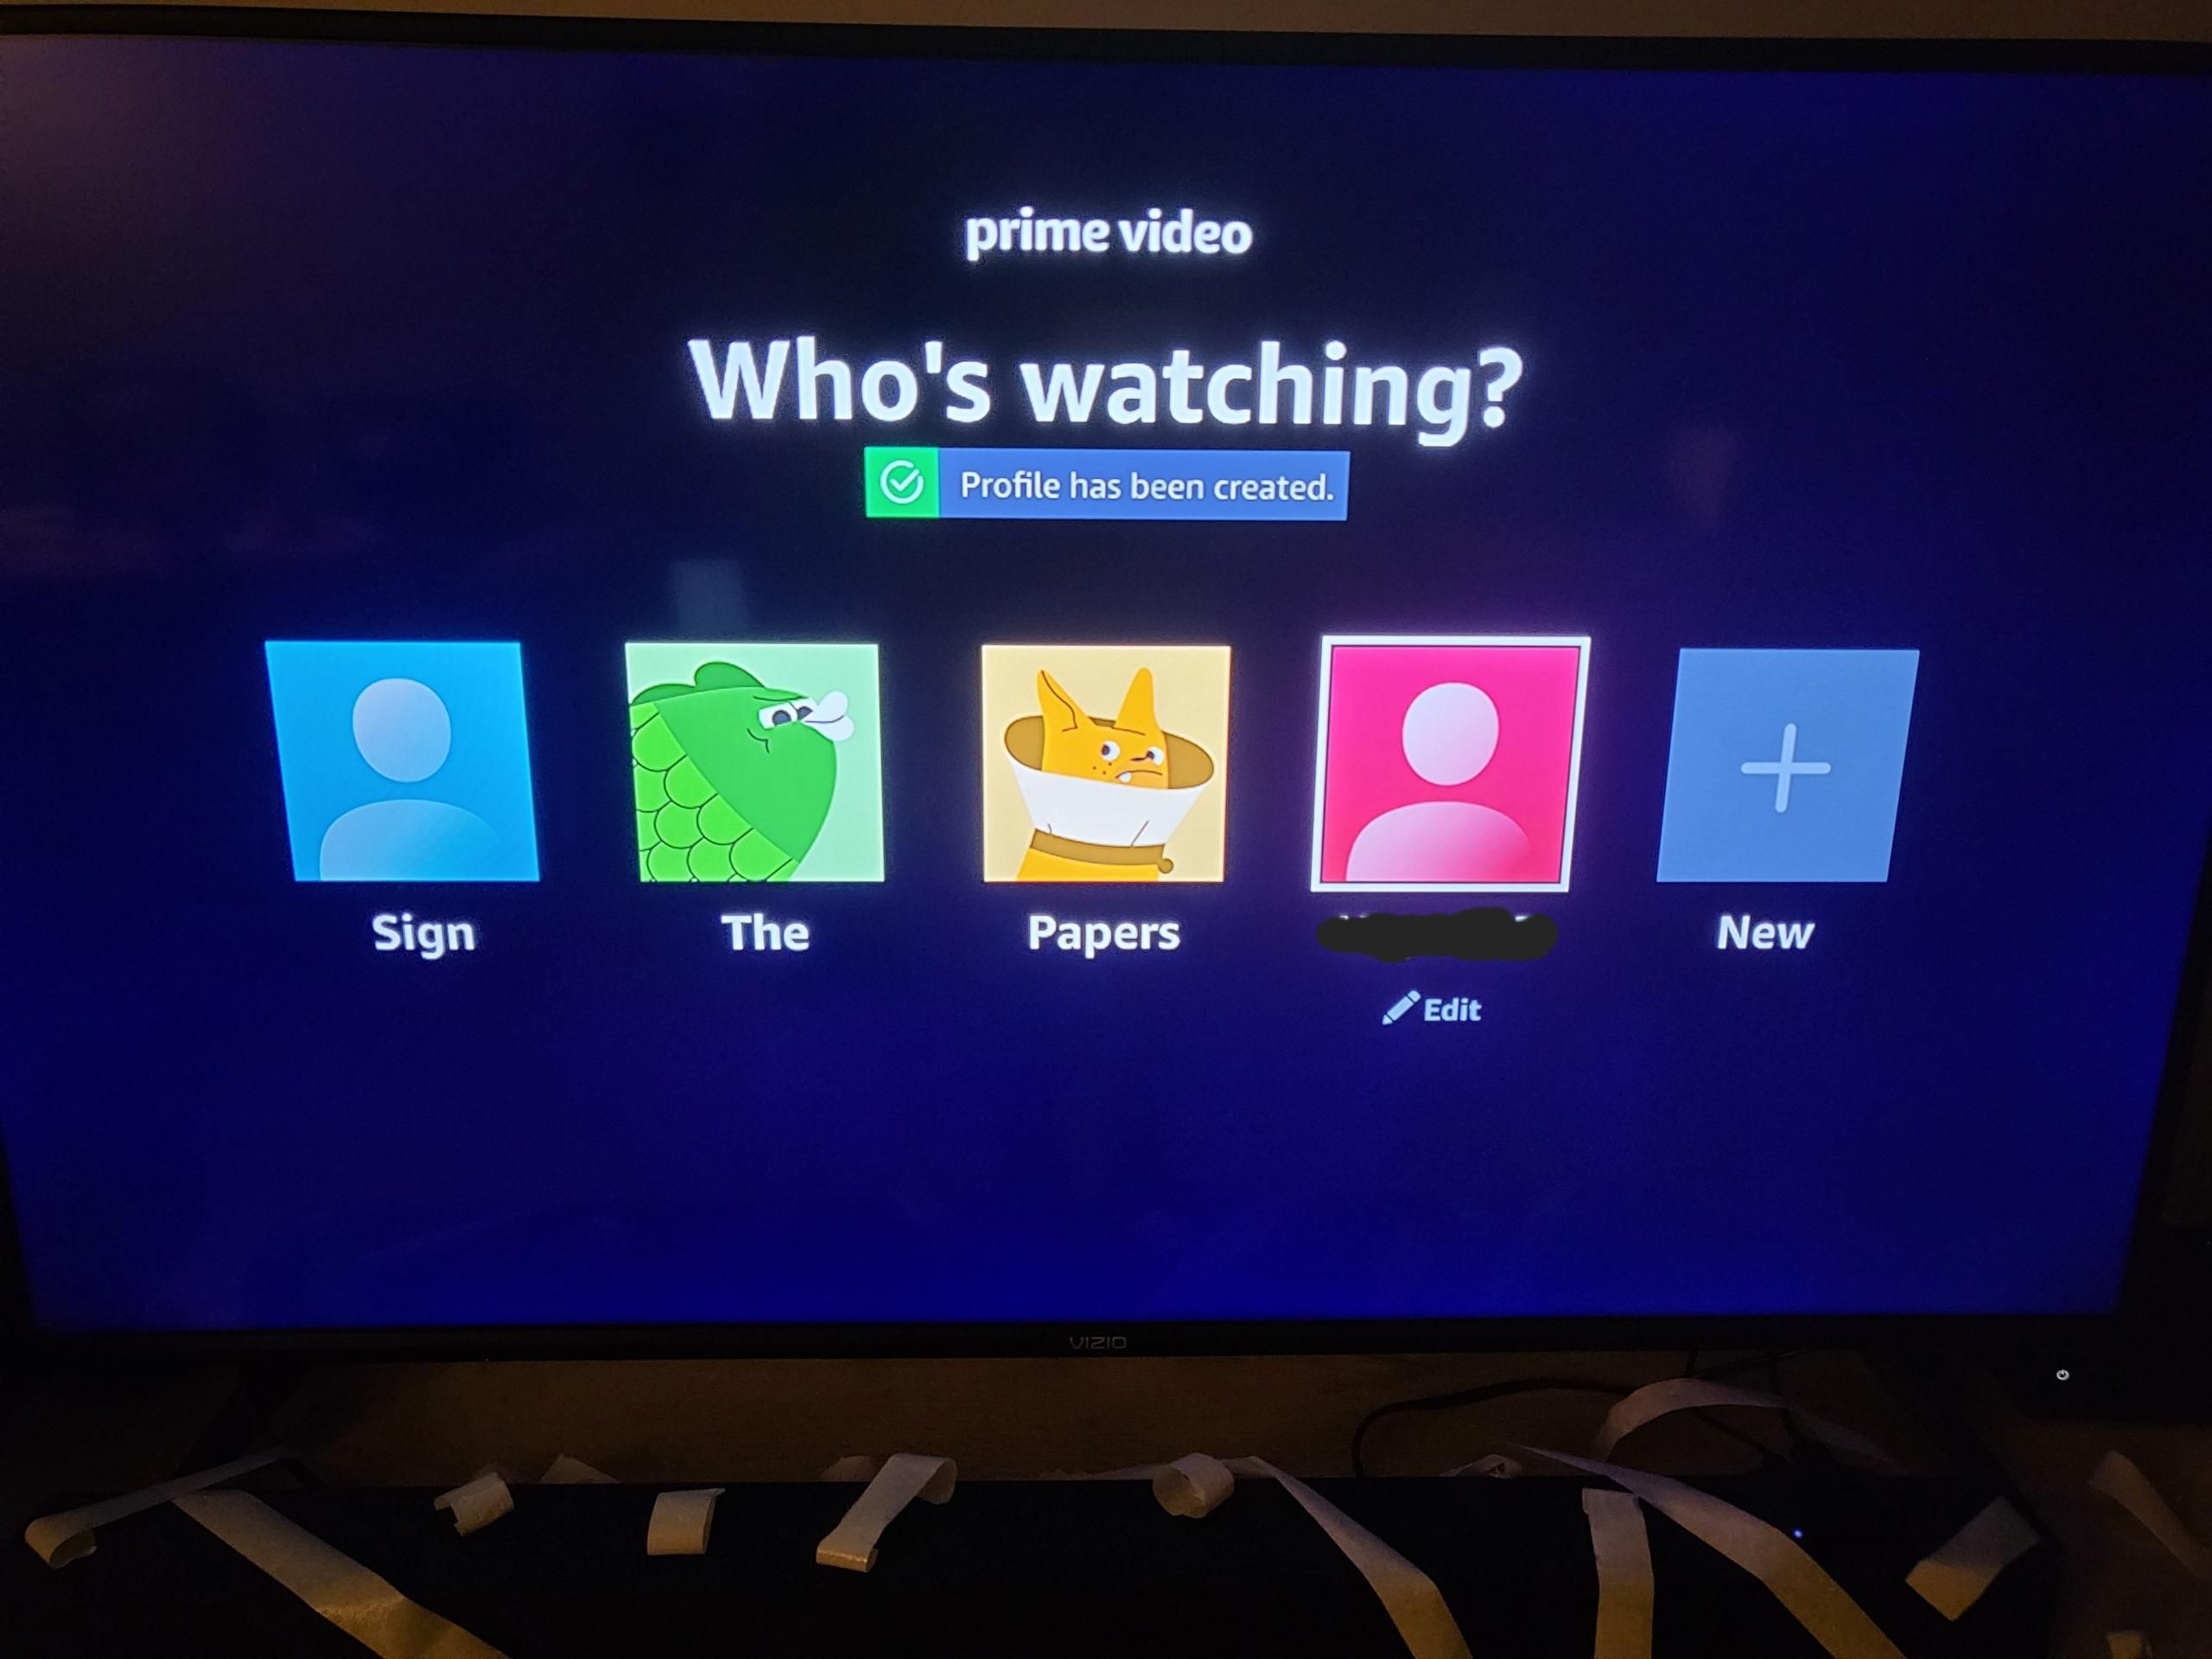 My buddy is going through a divorce and just found out his wife's family is still using his Amazon Video after a year of her not signing,so he did this.